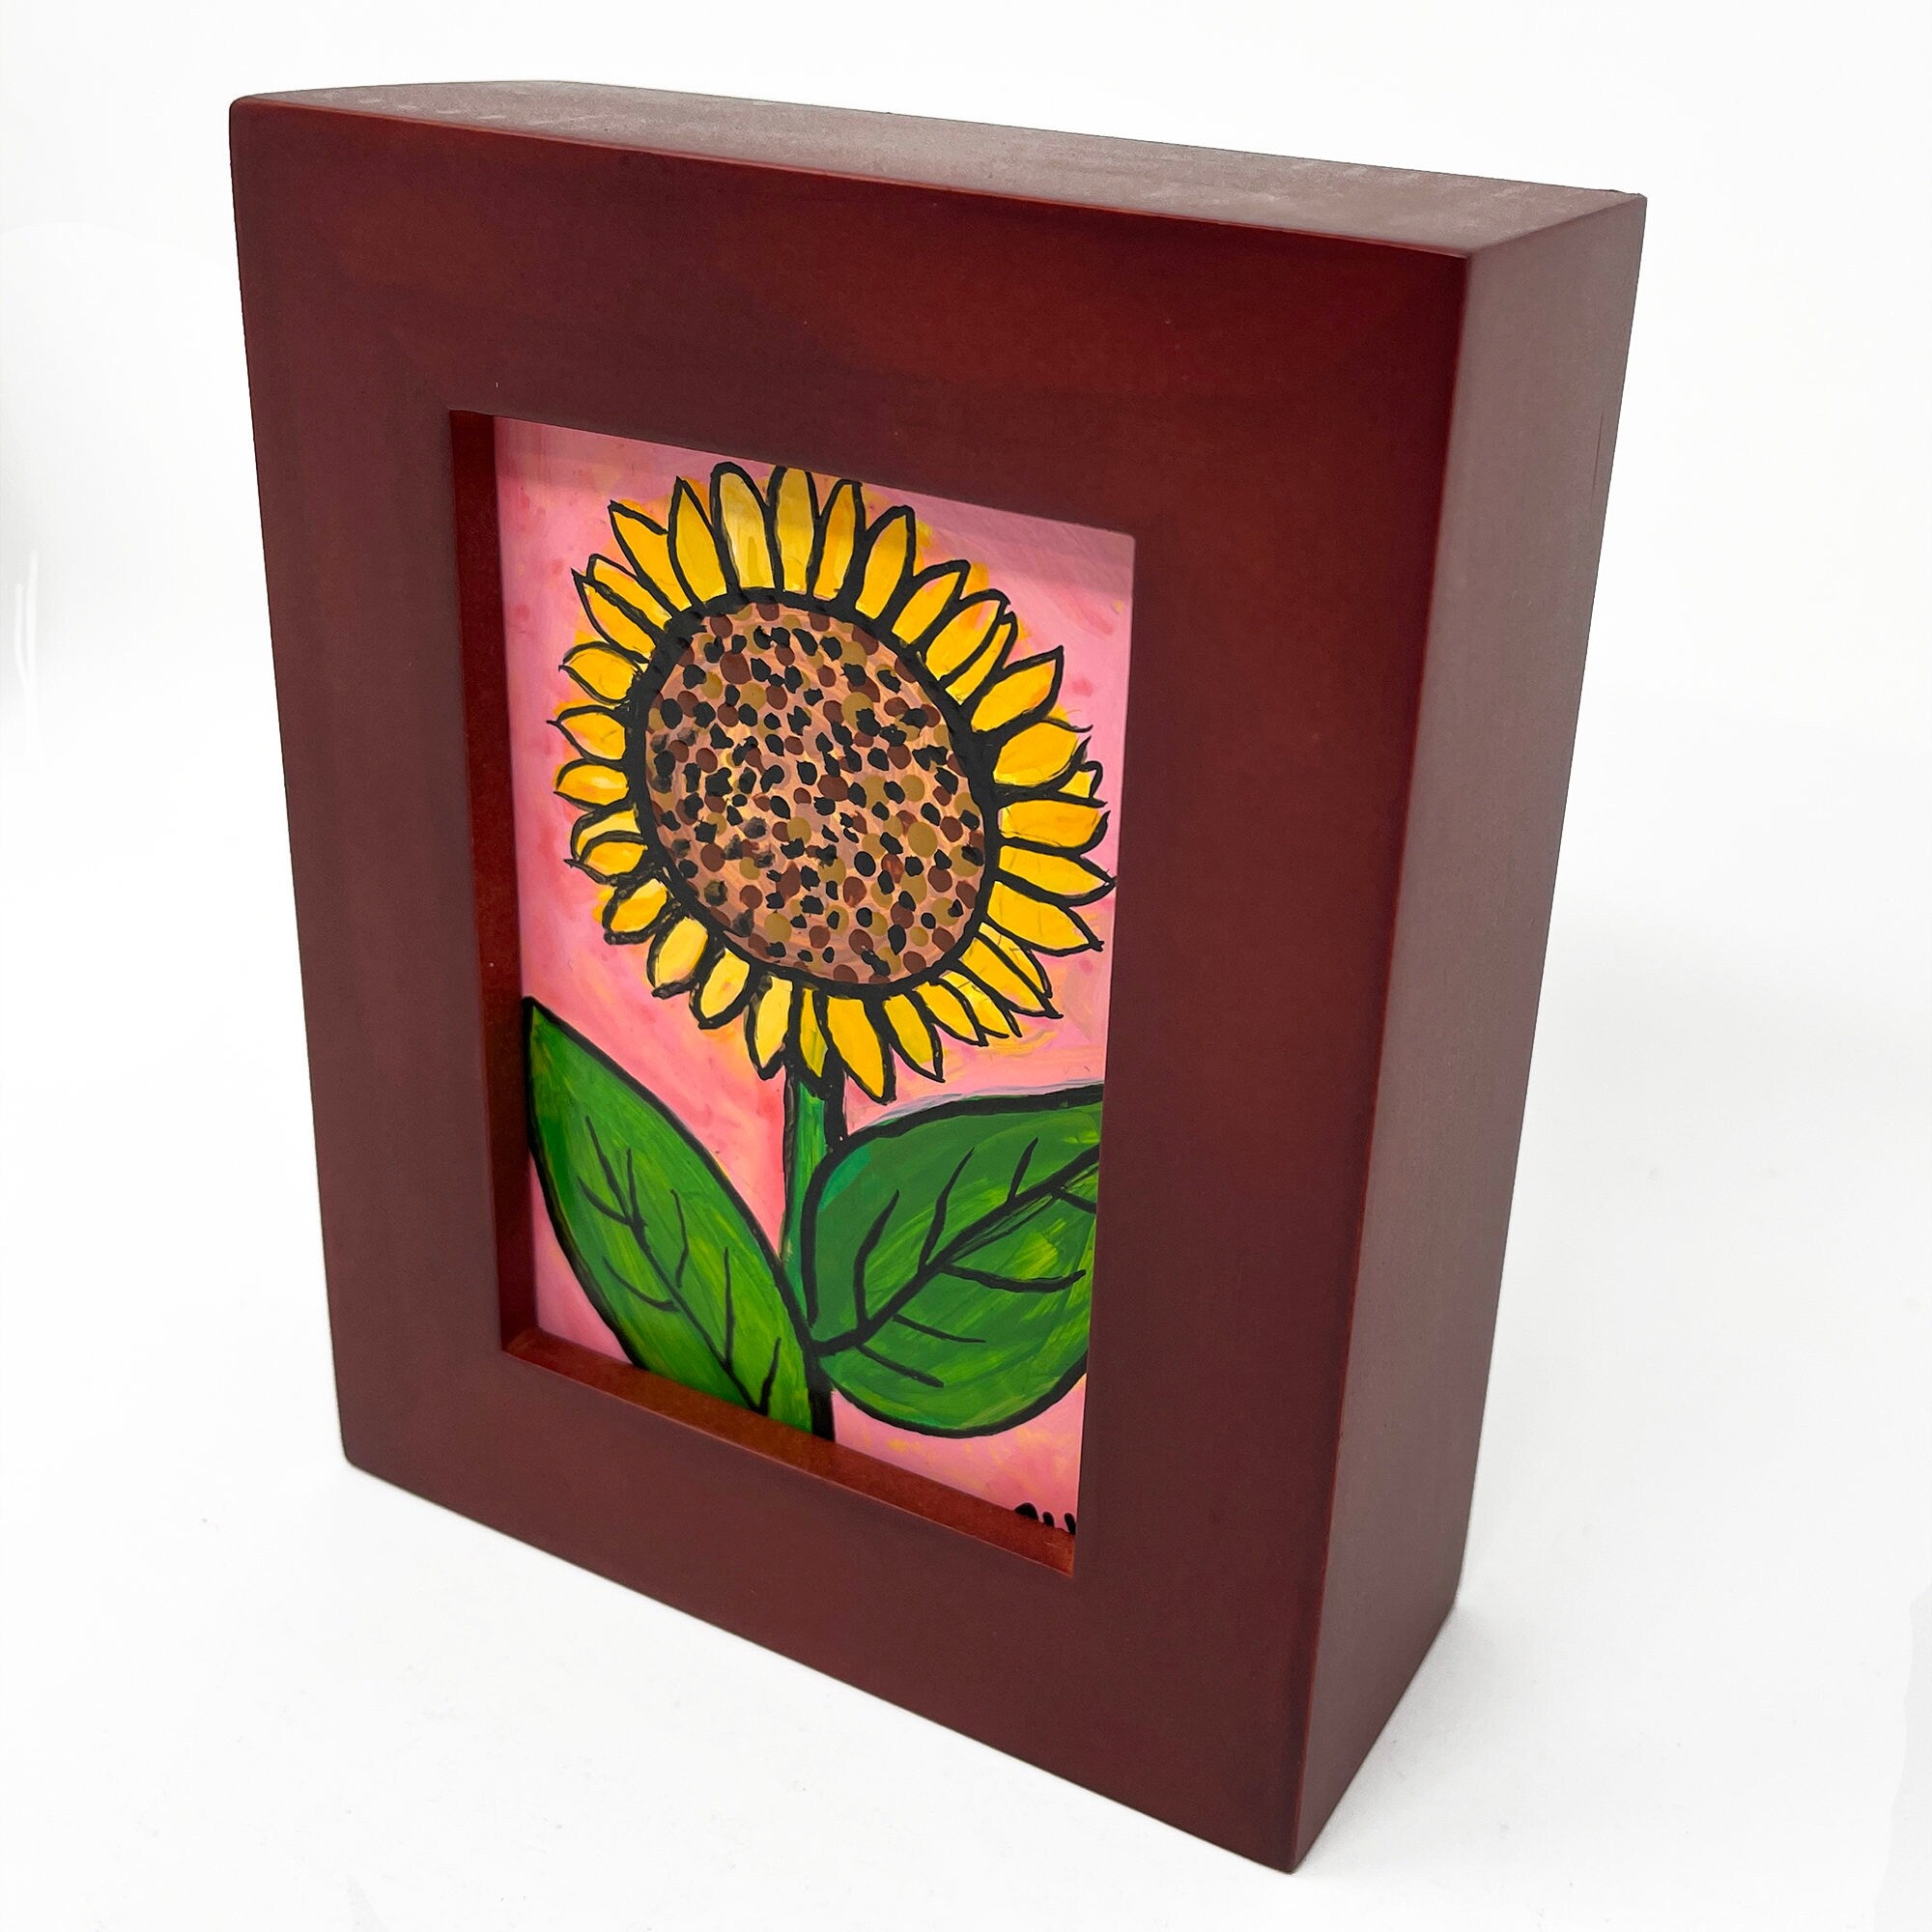 Side view of Sunflower Day painting in wood frame. Painting shows sunflower in the center with yellow petals, brown center, and green leaves on light pink background.